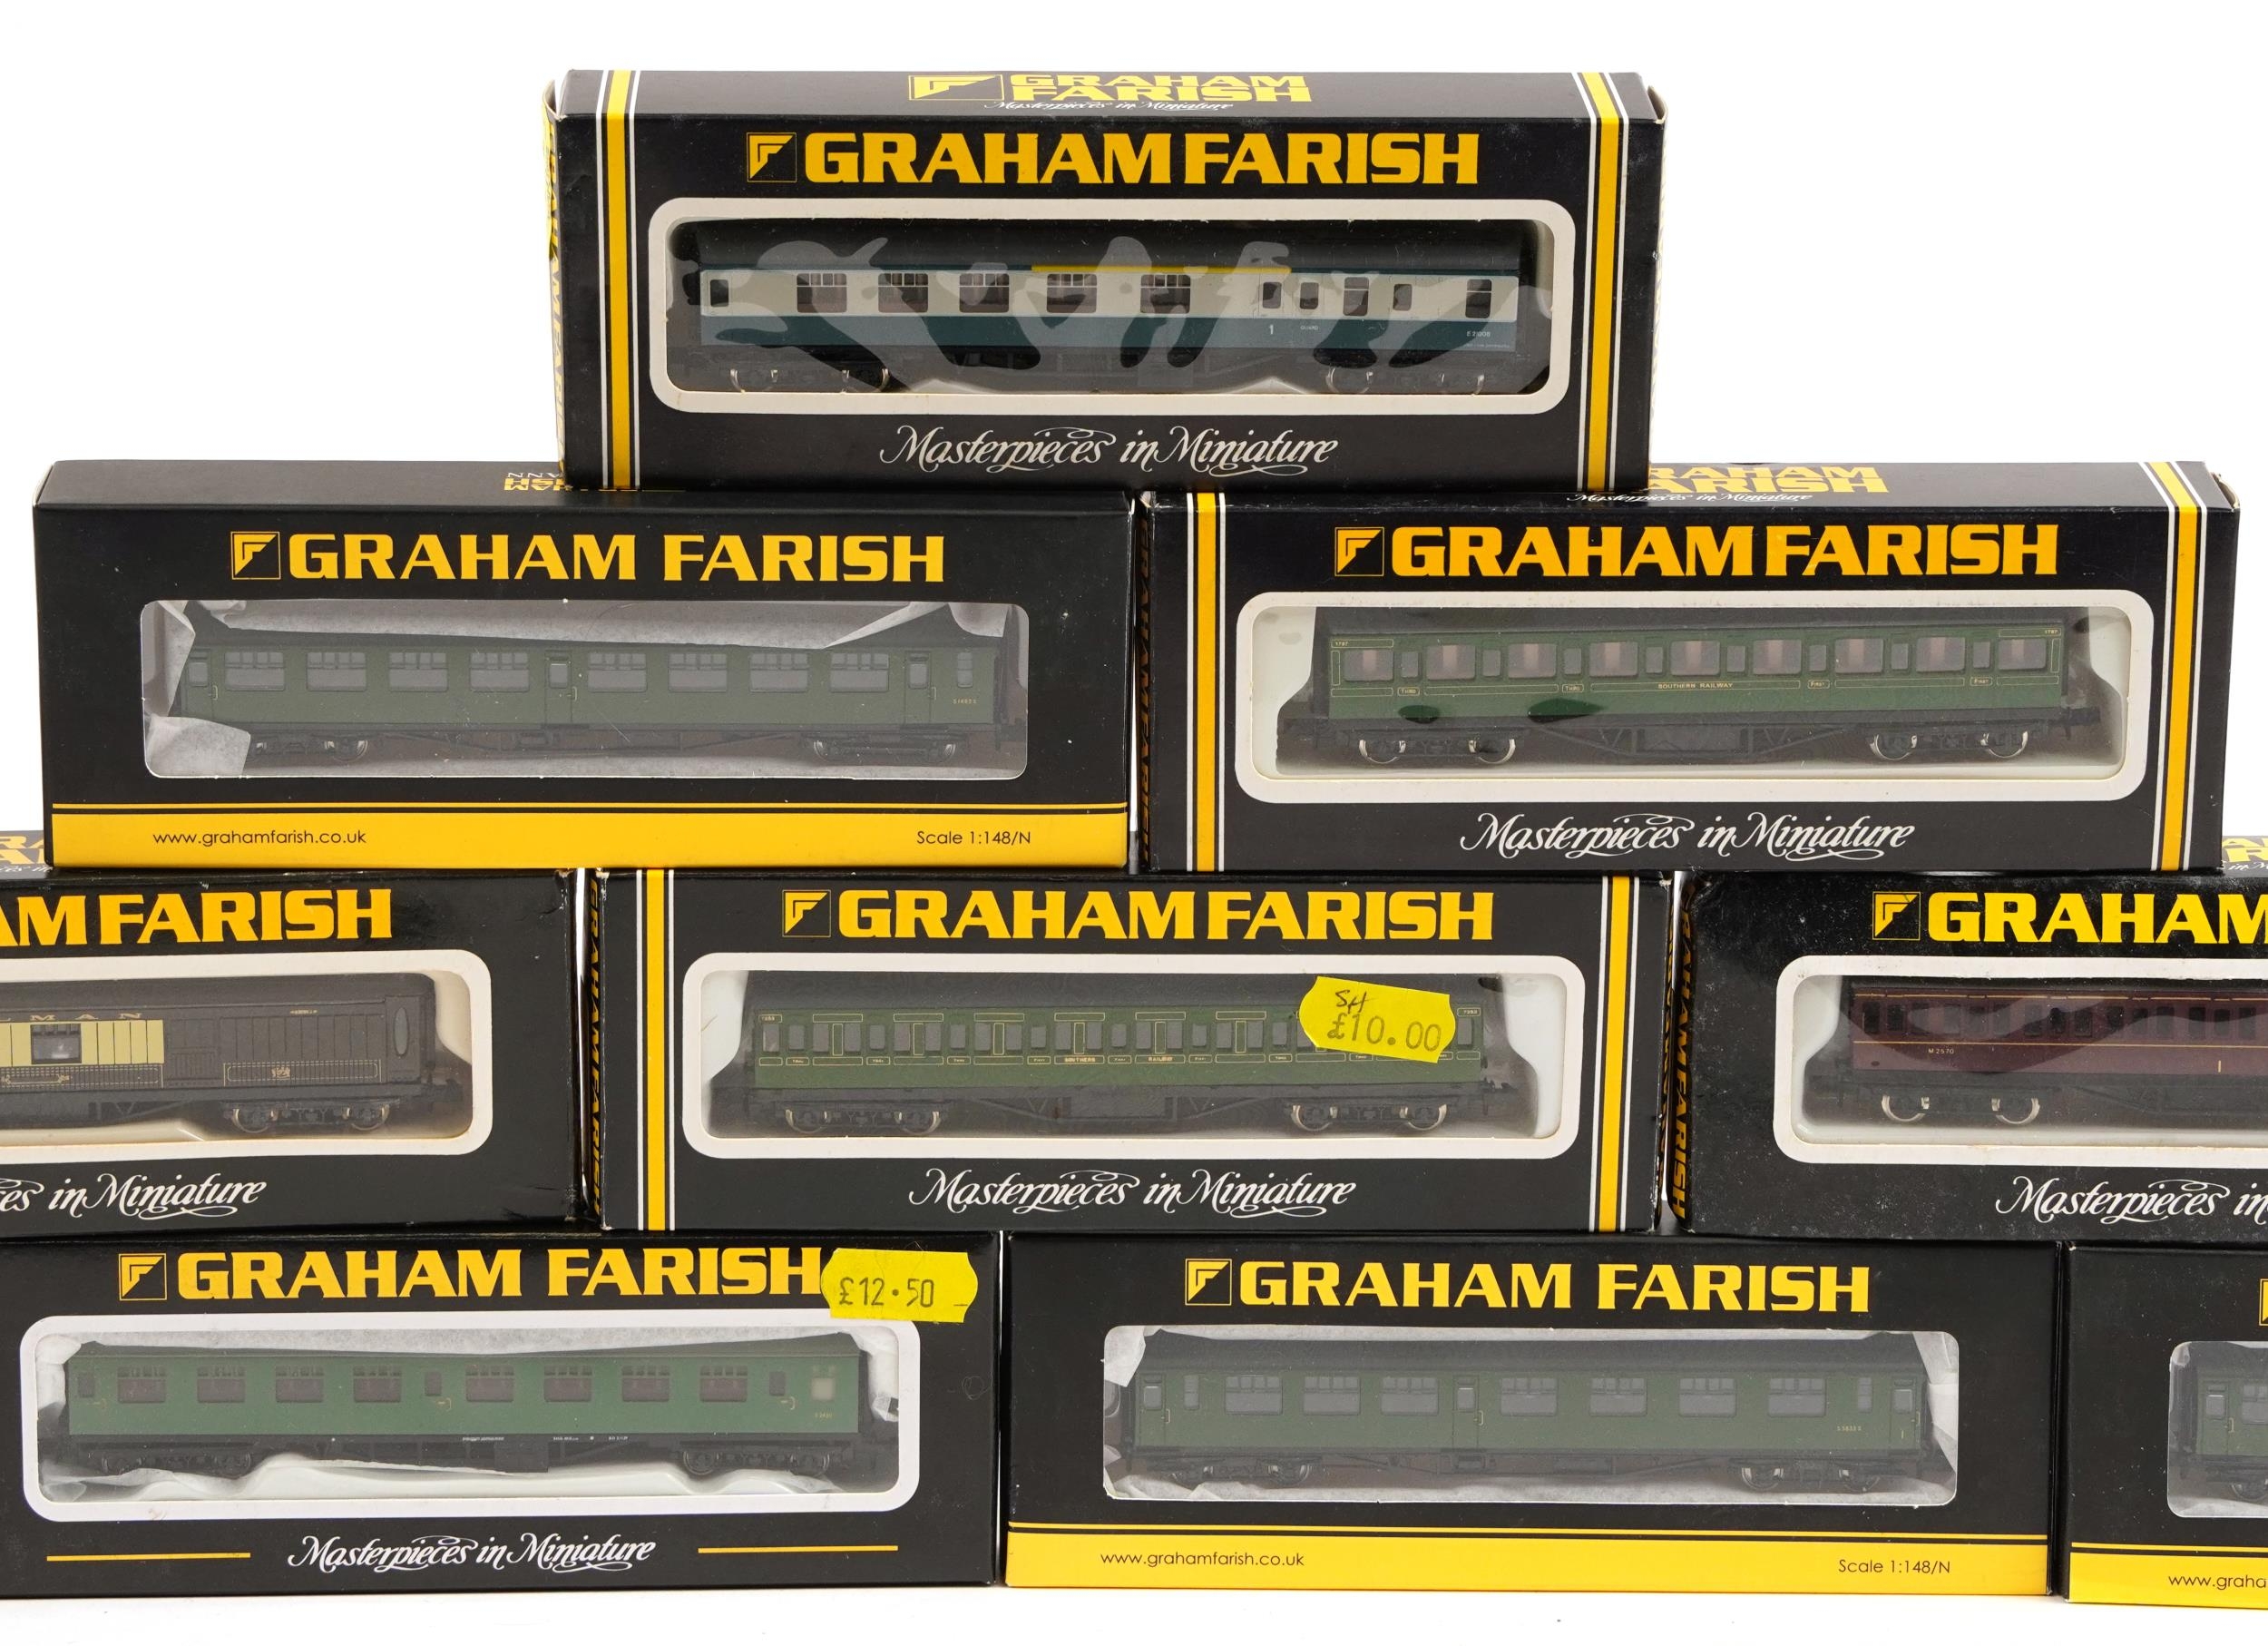 Ten Graham Farish N gauge model railway carriages with boxes, numbers 0603, 0615, 0623, 0646, - Image 3 of 5